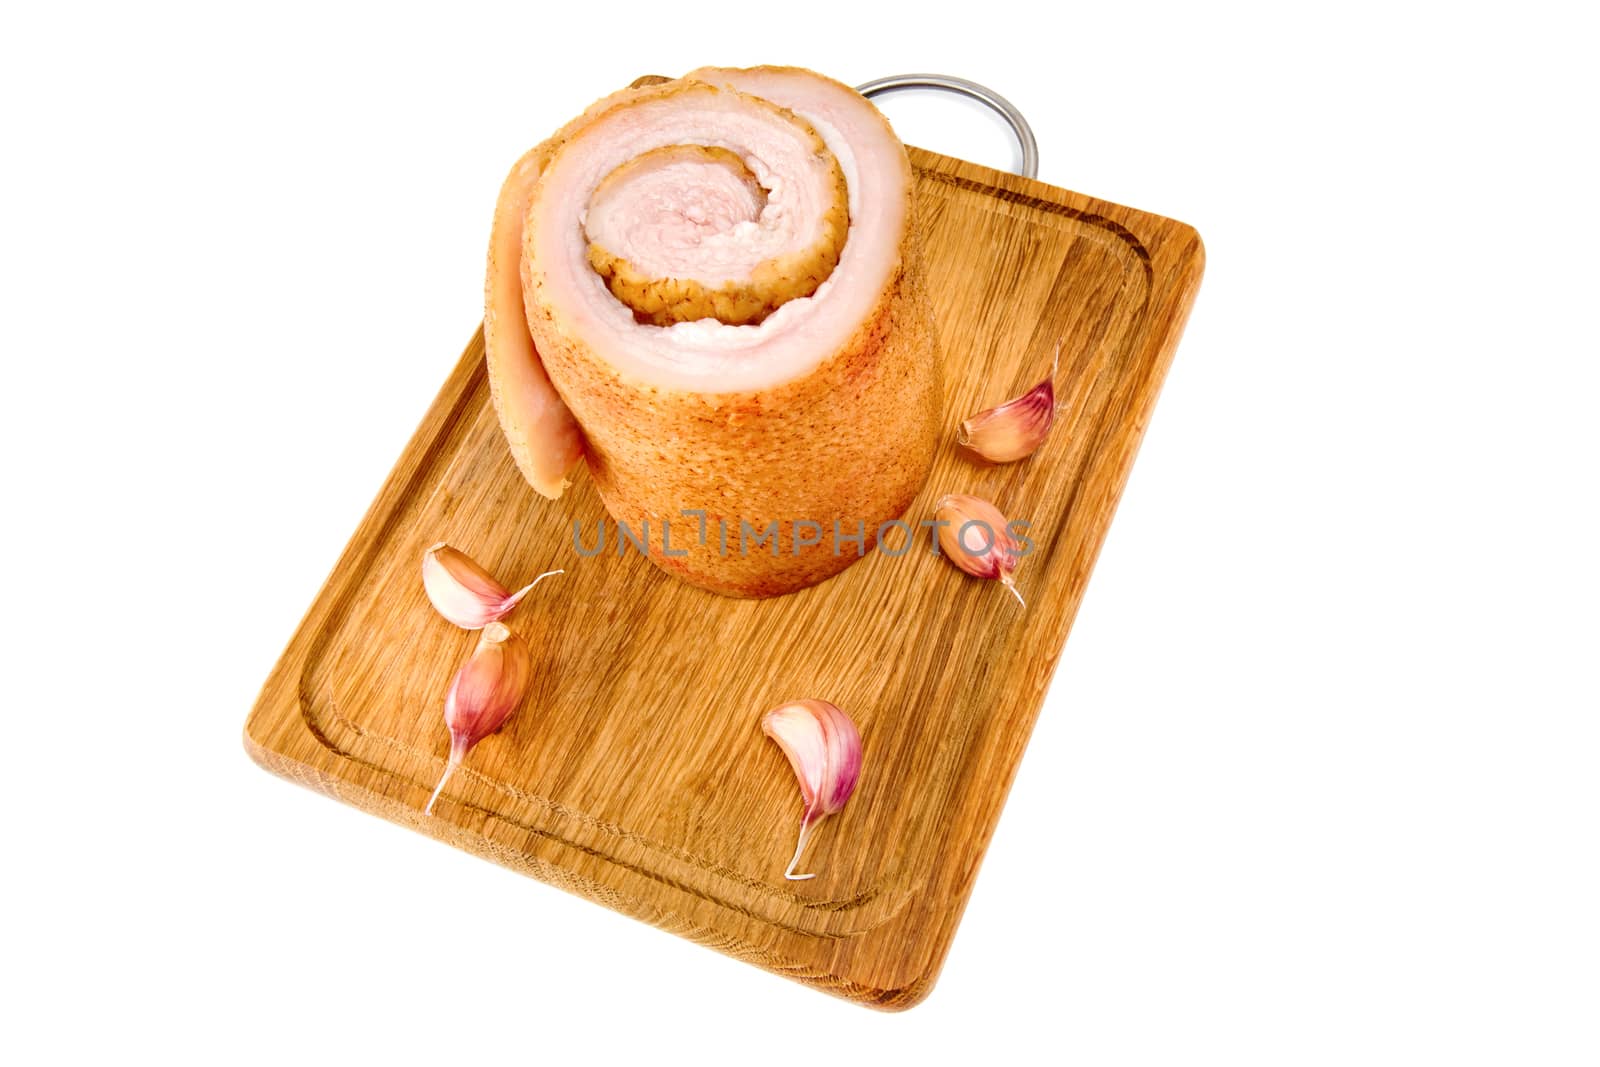 Pork belly and not peeled garlic on wooden board isolated on a white background.